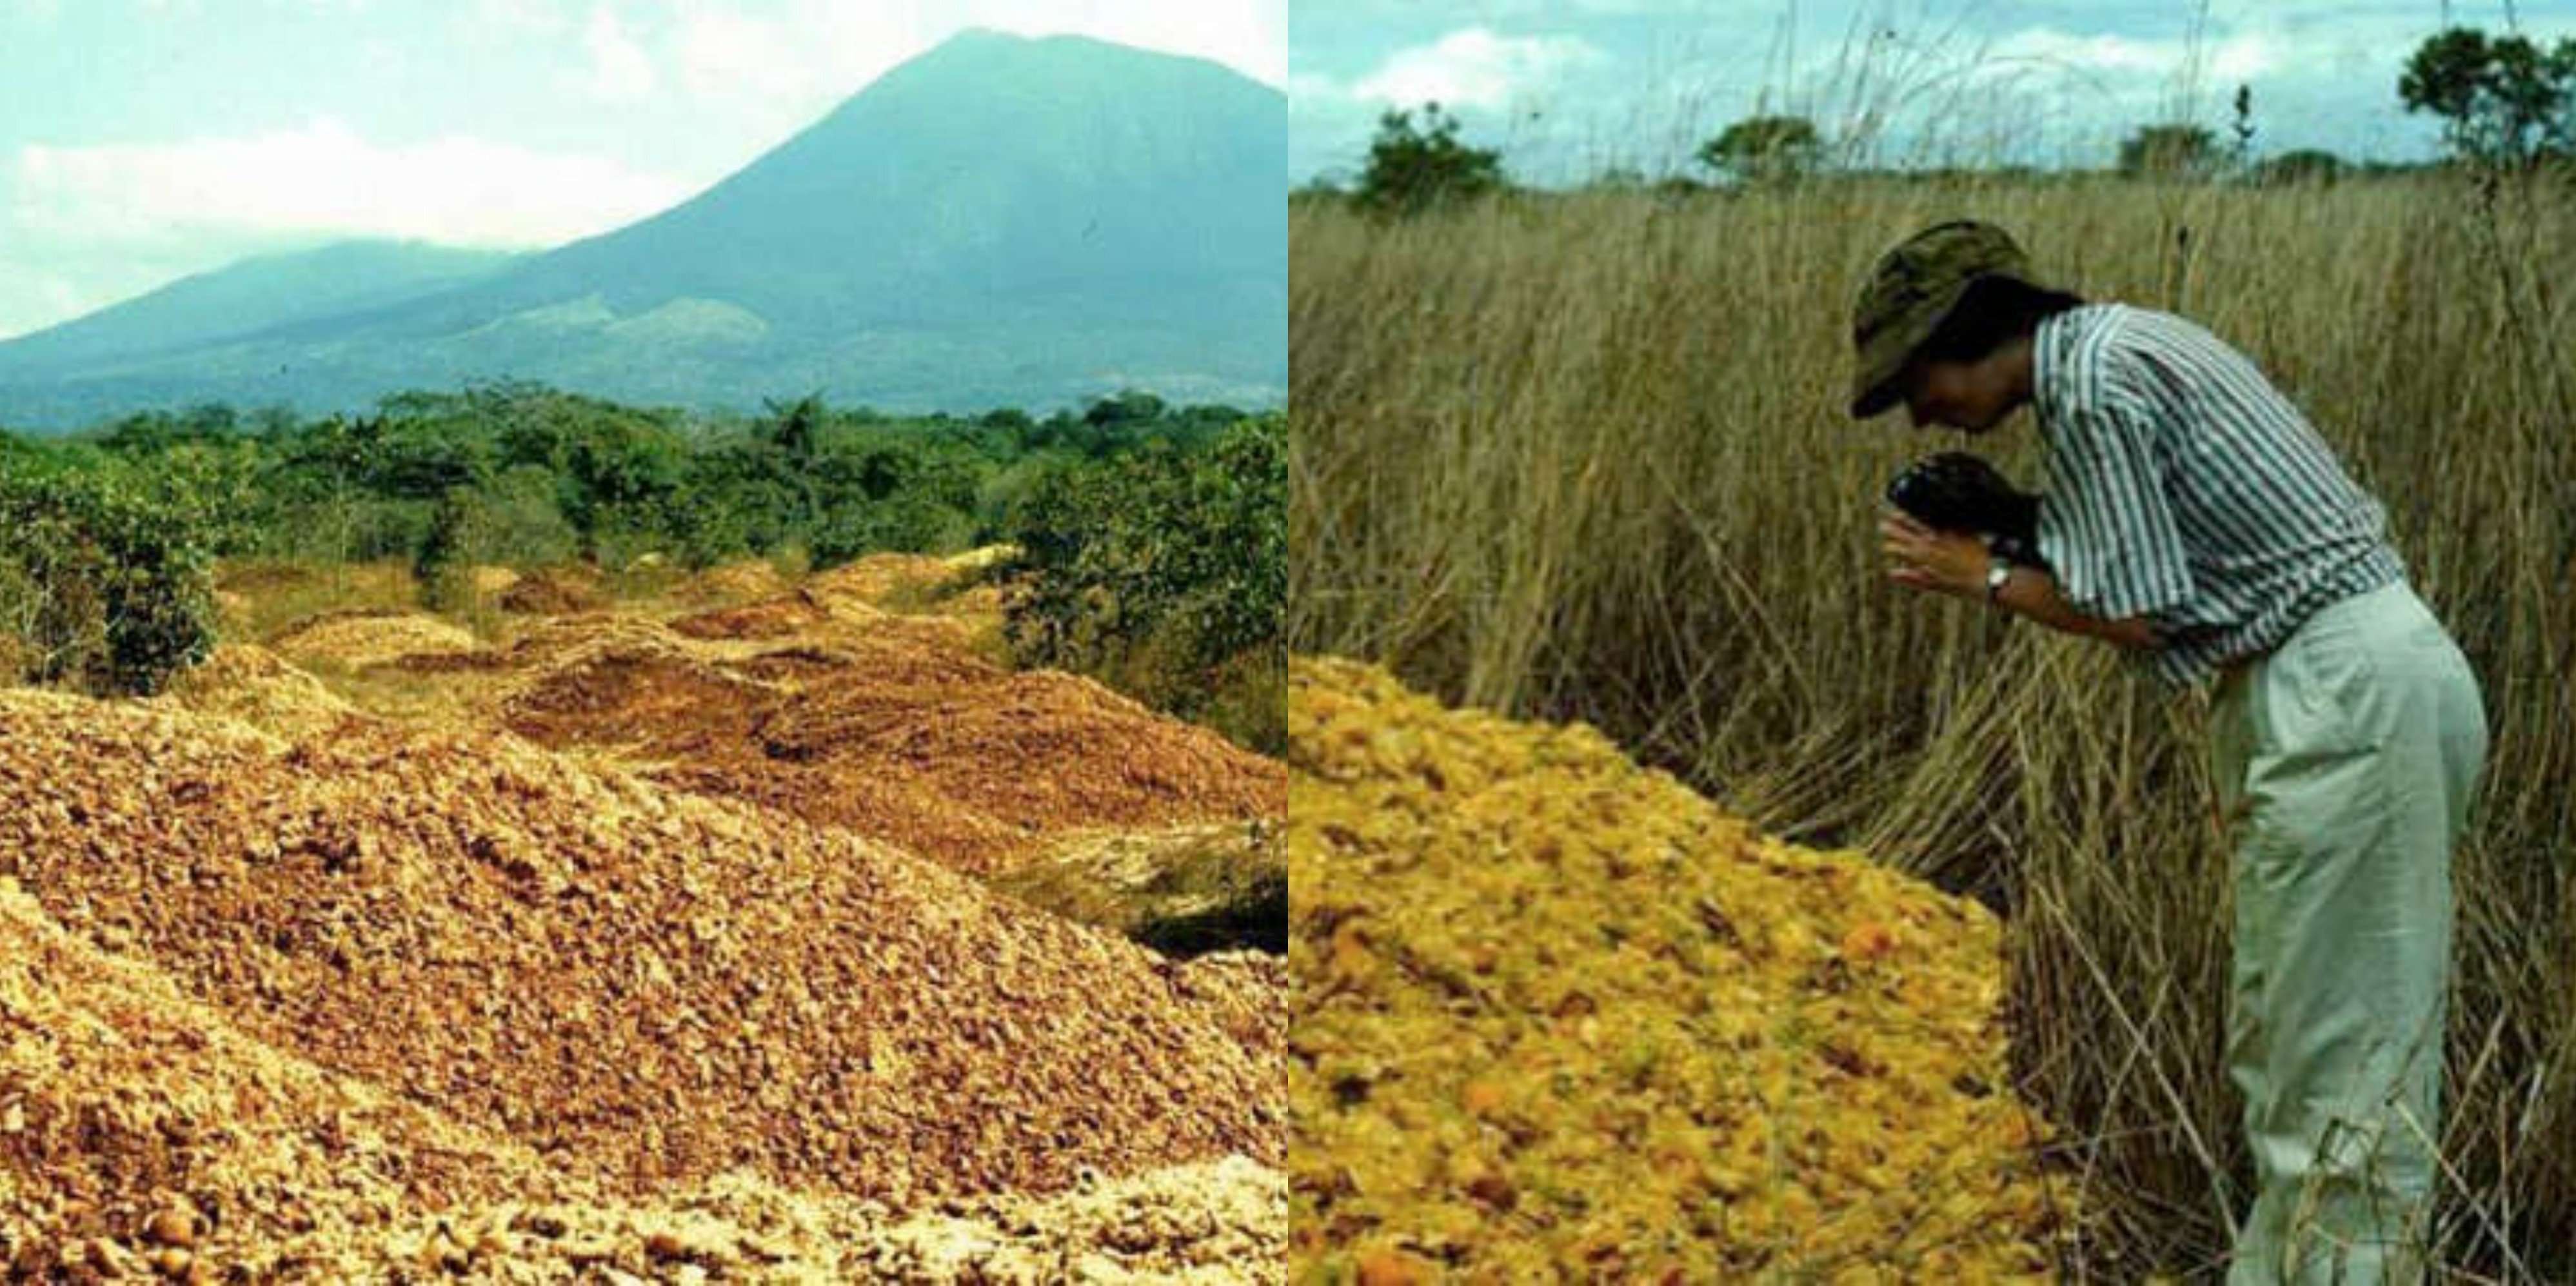 image for A Juice Company Dumped Orange Peels in a National Park. Here’s What it Looks Like Now